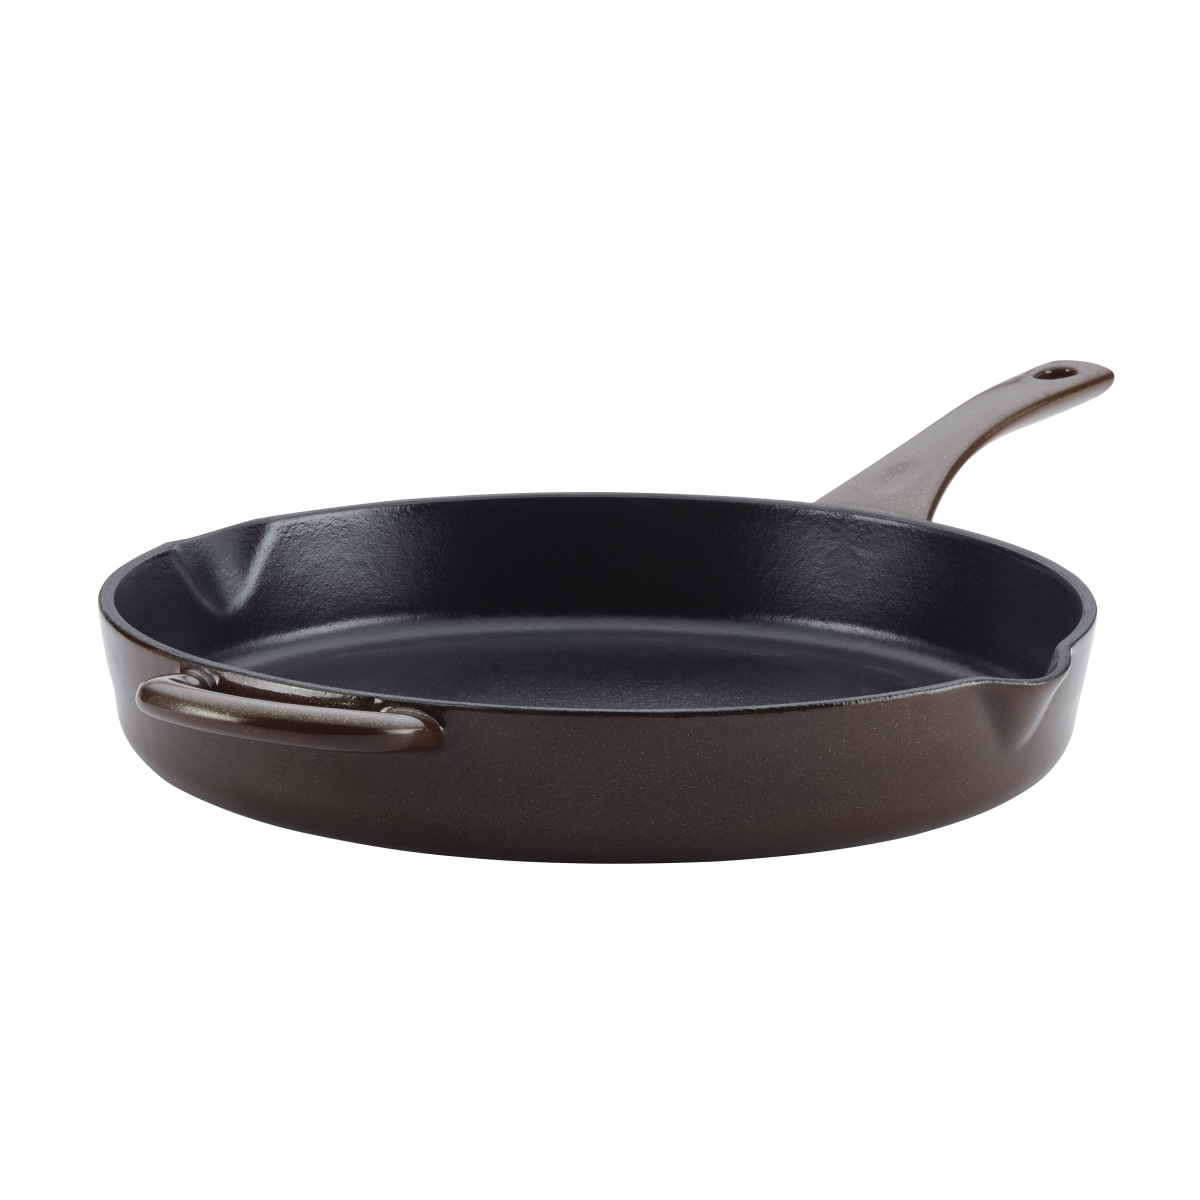 46962 Cast Iron Enamel Skillet With Pour Spouts, 12 In. - Brown Sugar